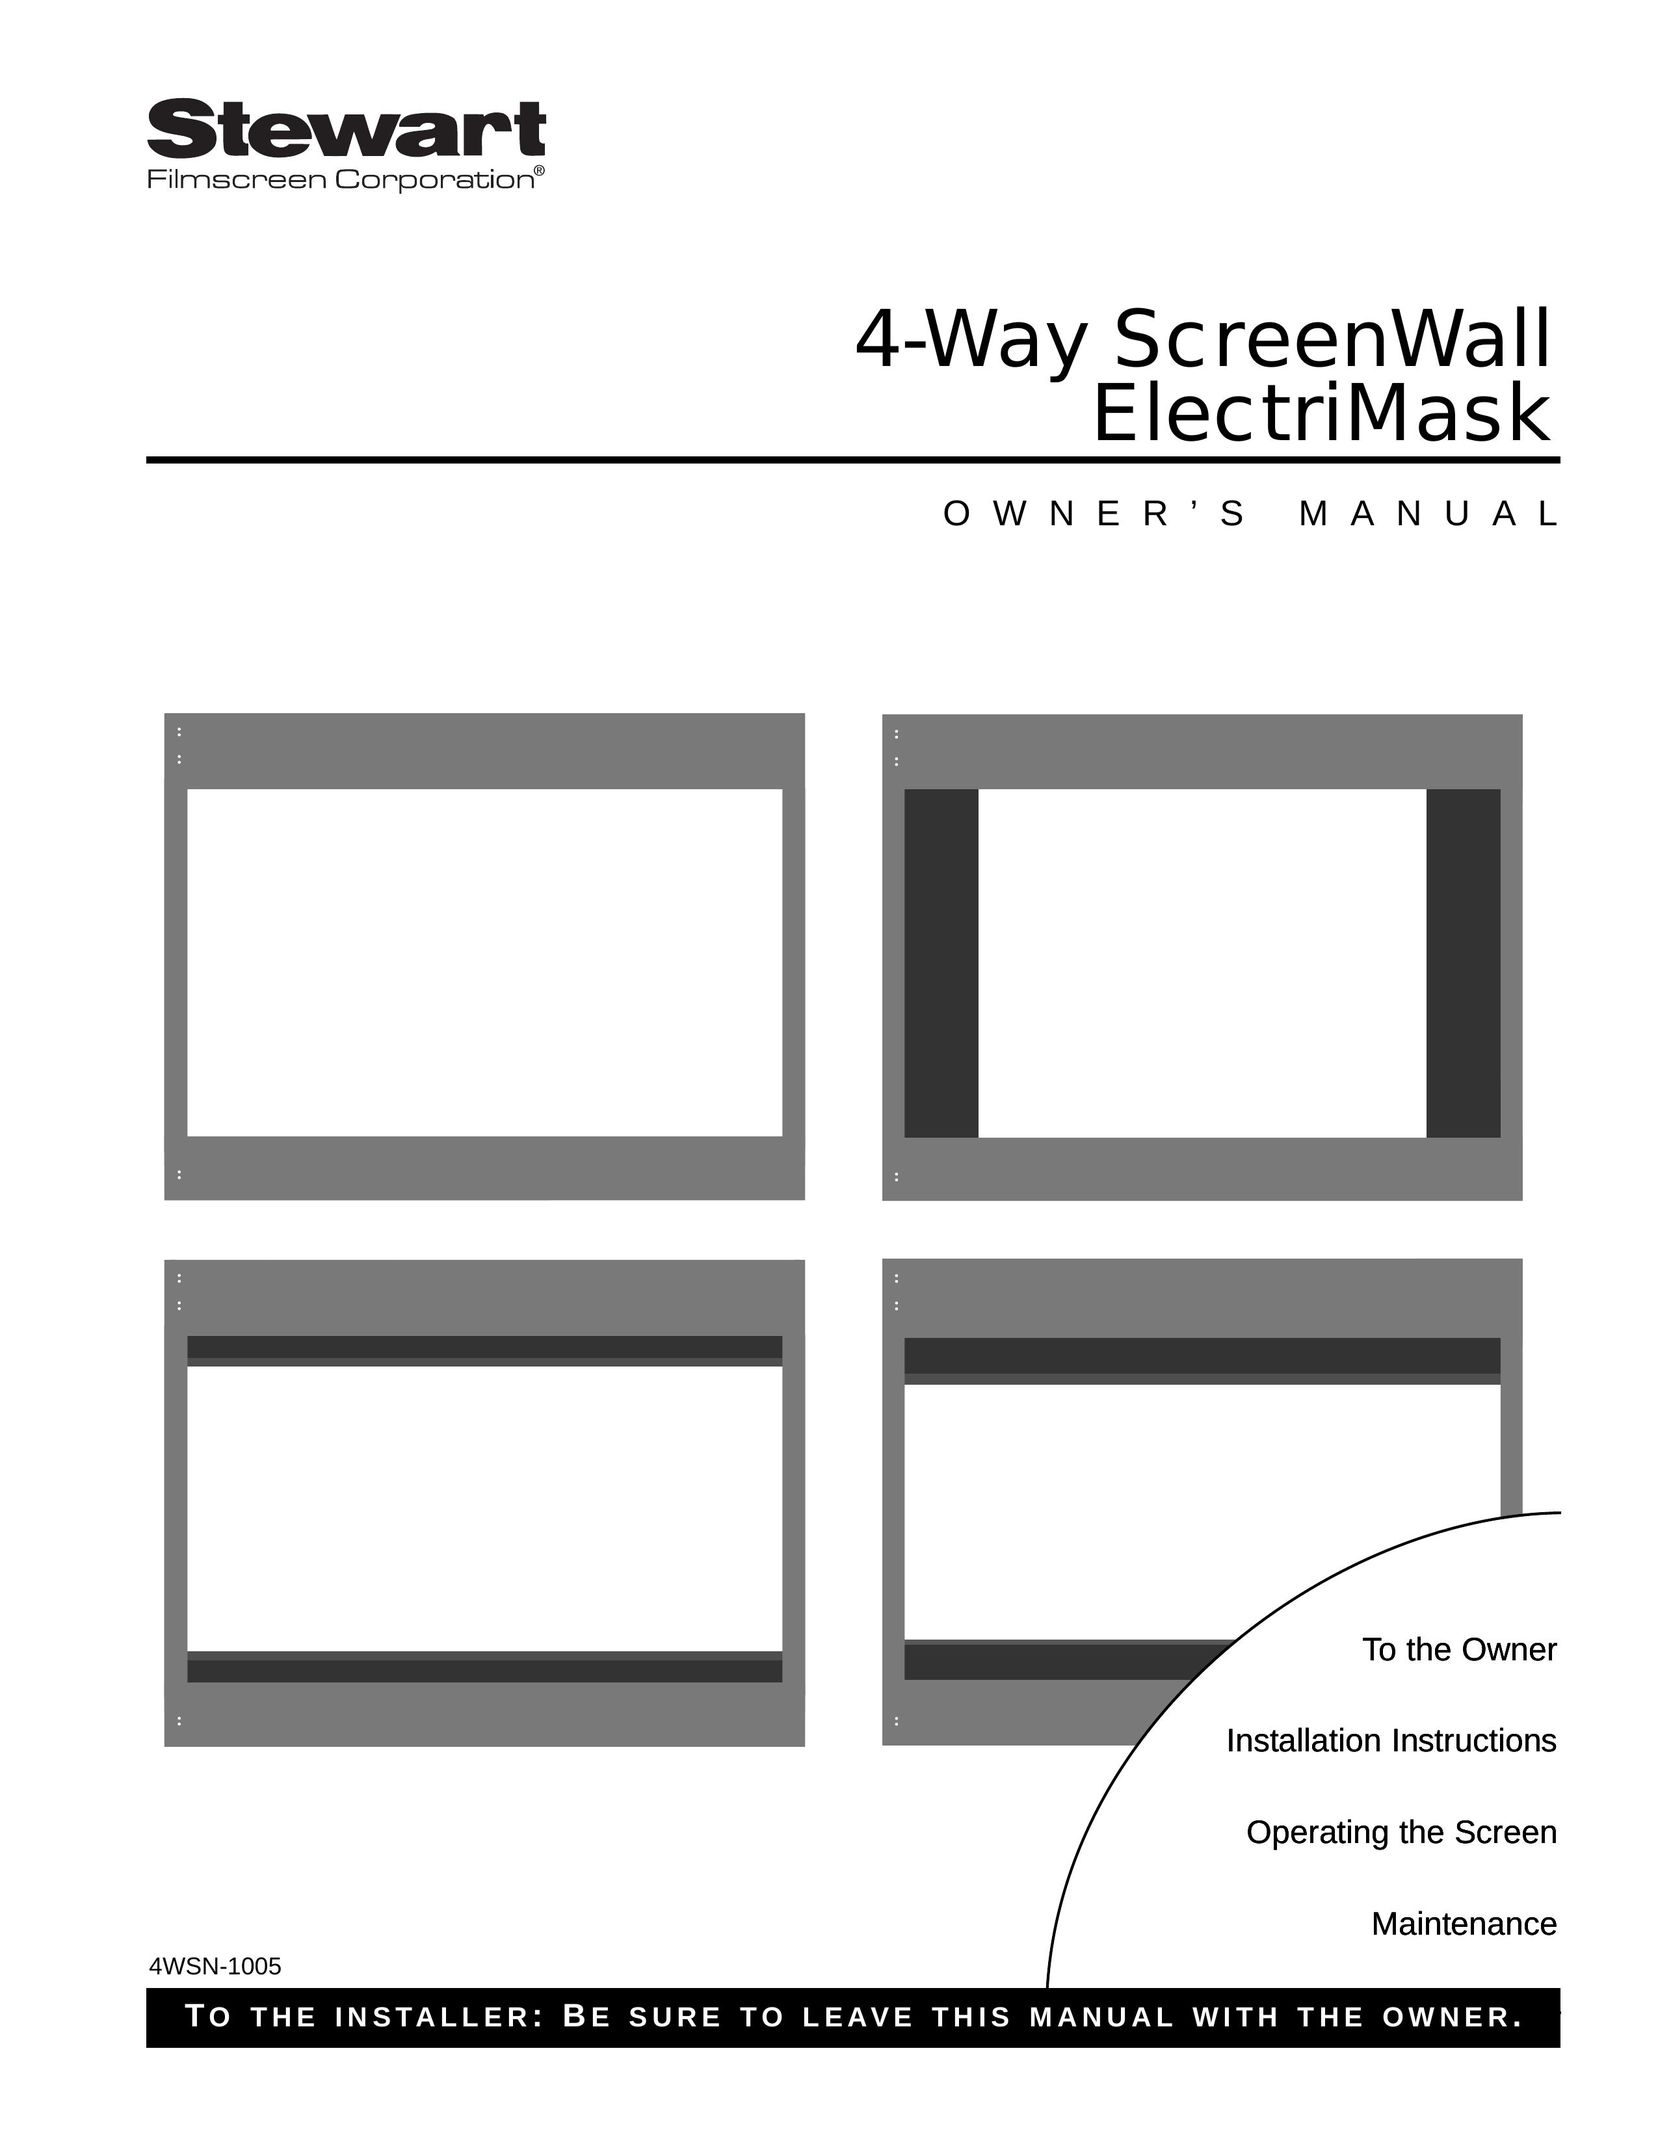 Stewart Filmscreen Corp 4-Way ScreenWall ElectriMask Projection Television User Manual